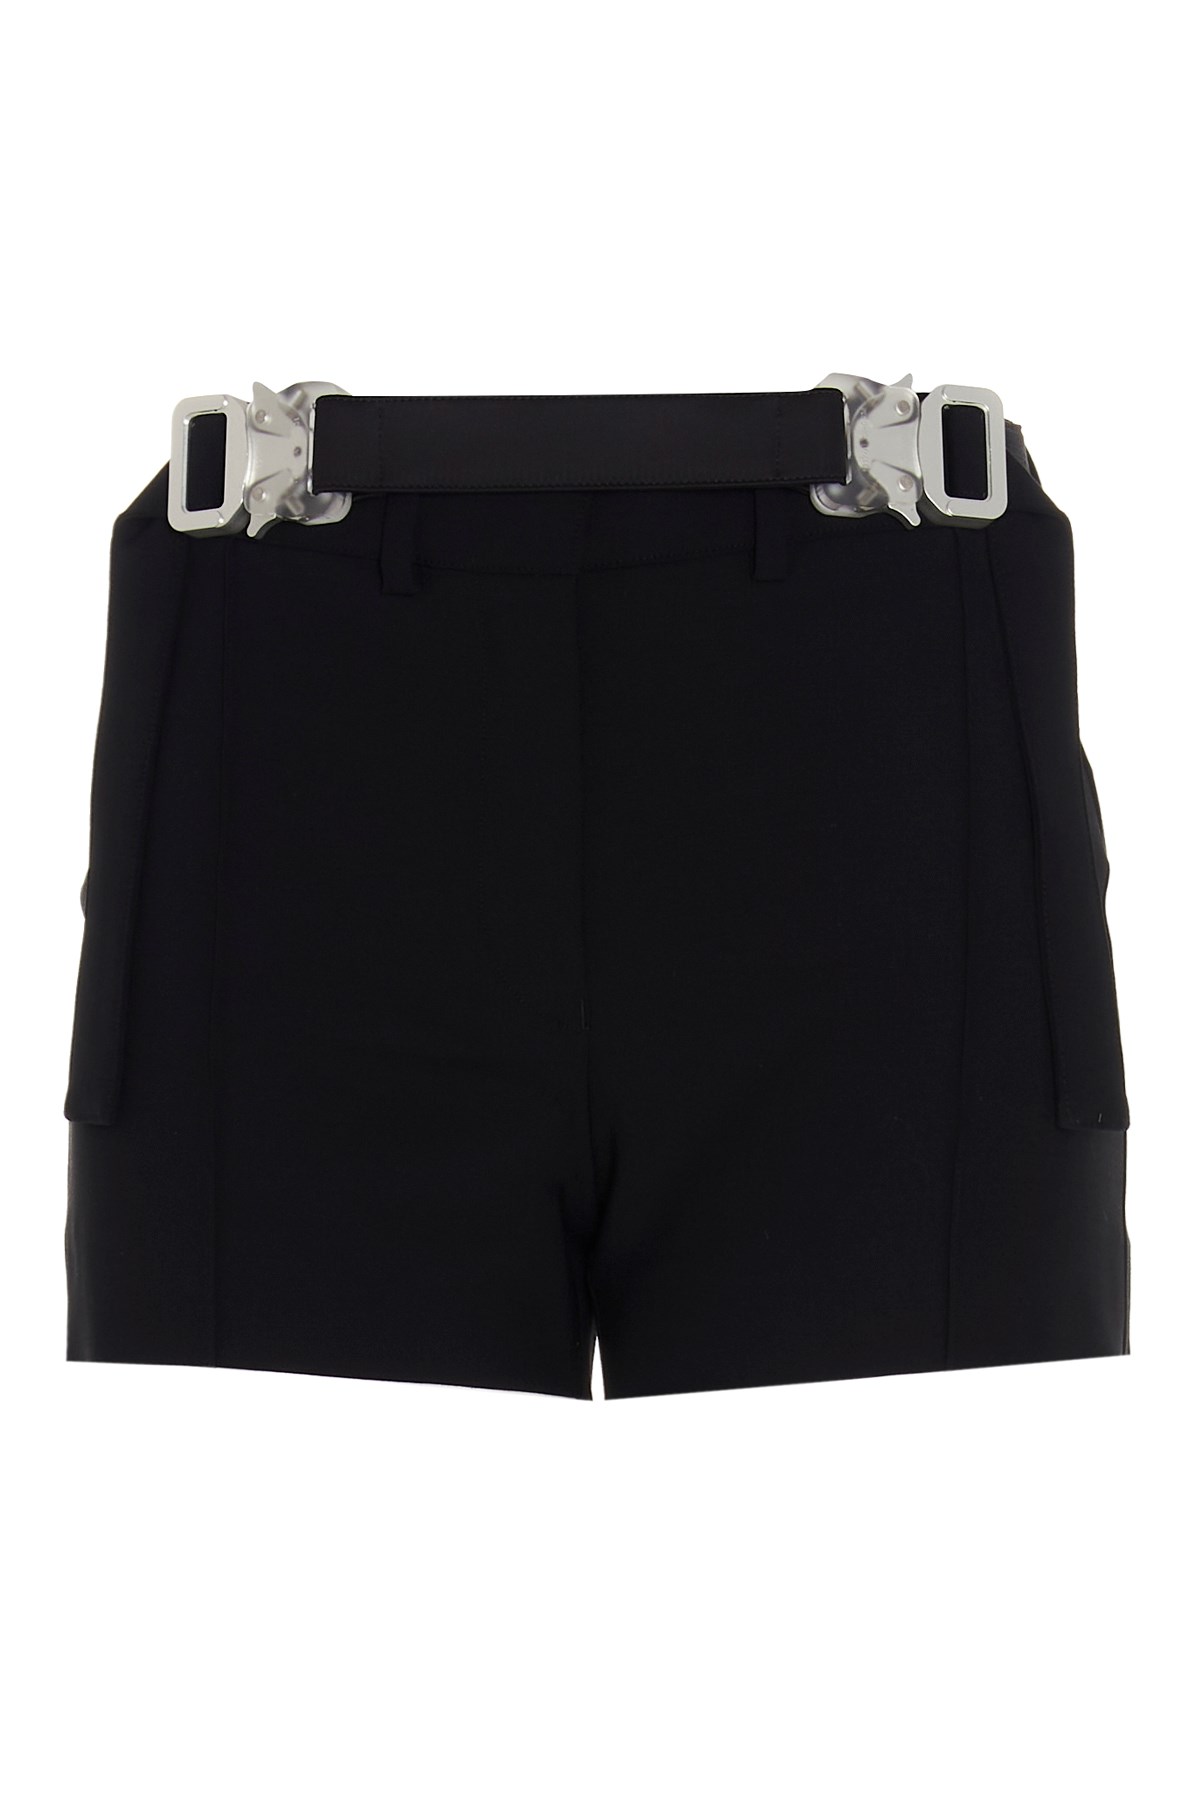 1017-ALYX-9SM Shorts 'Double Buckle'